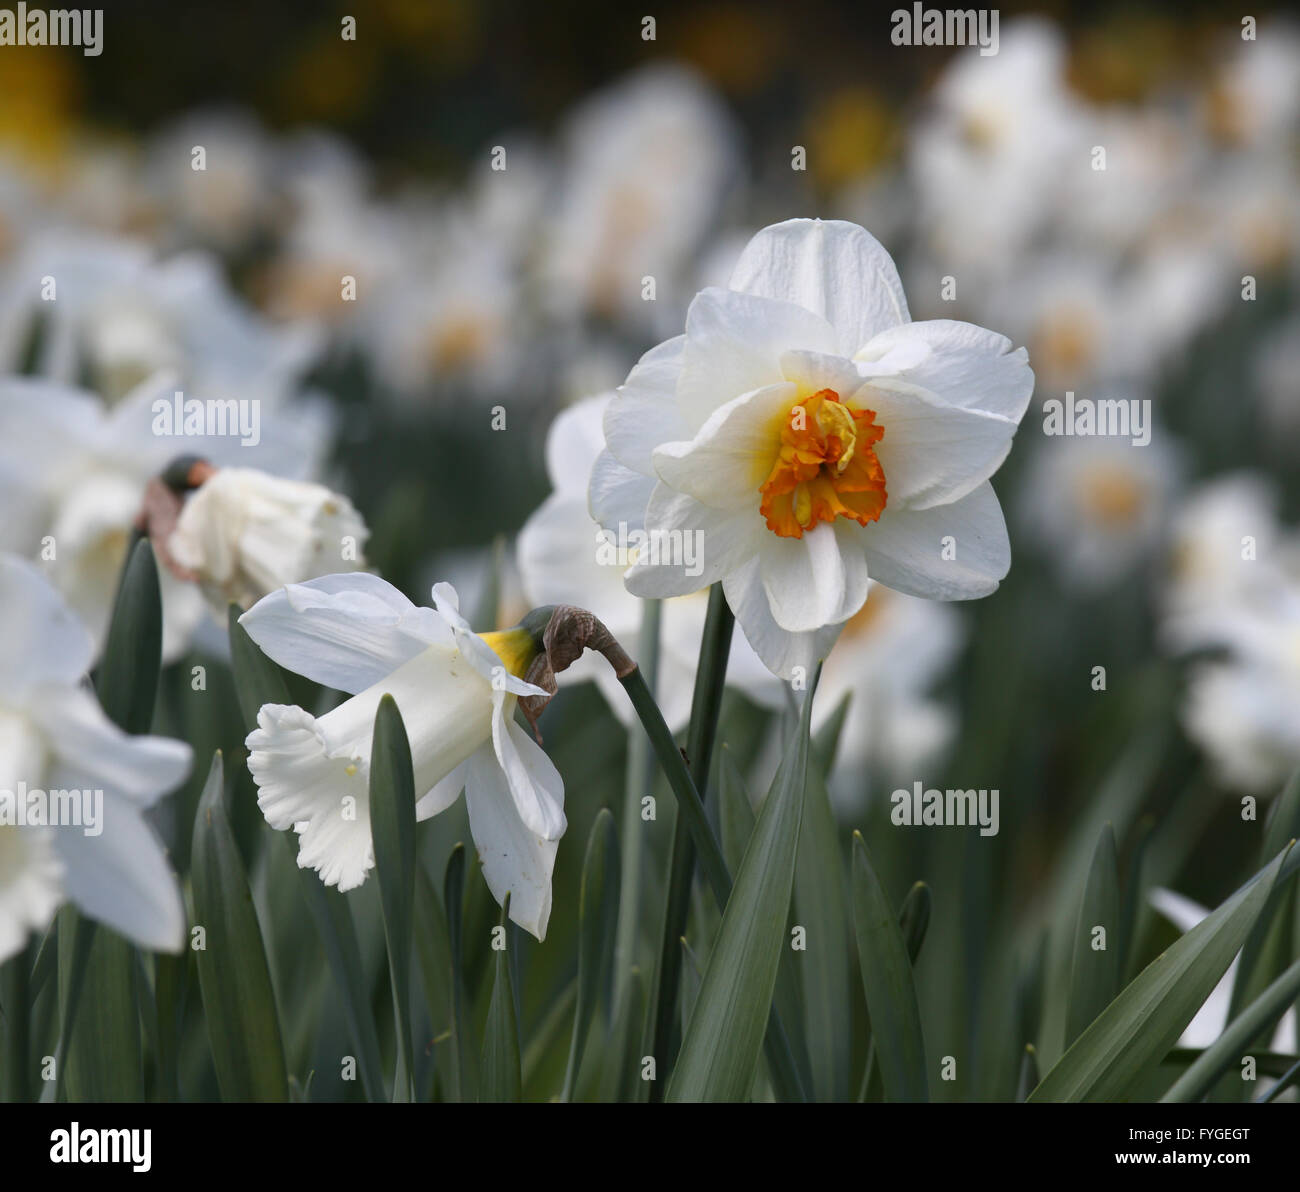 White Narcissus with 'pheasant's eye' trumpet, Narcissus poeticus Stock Photo